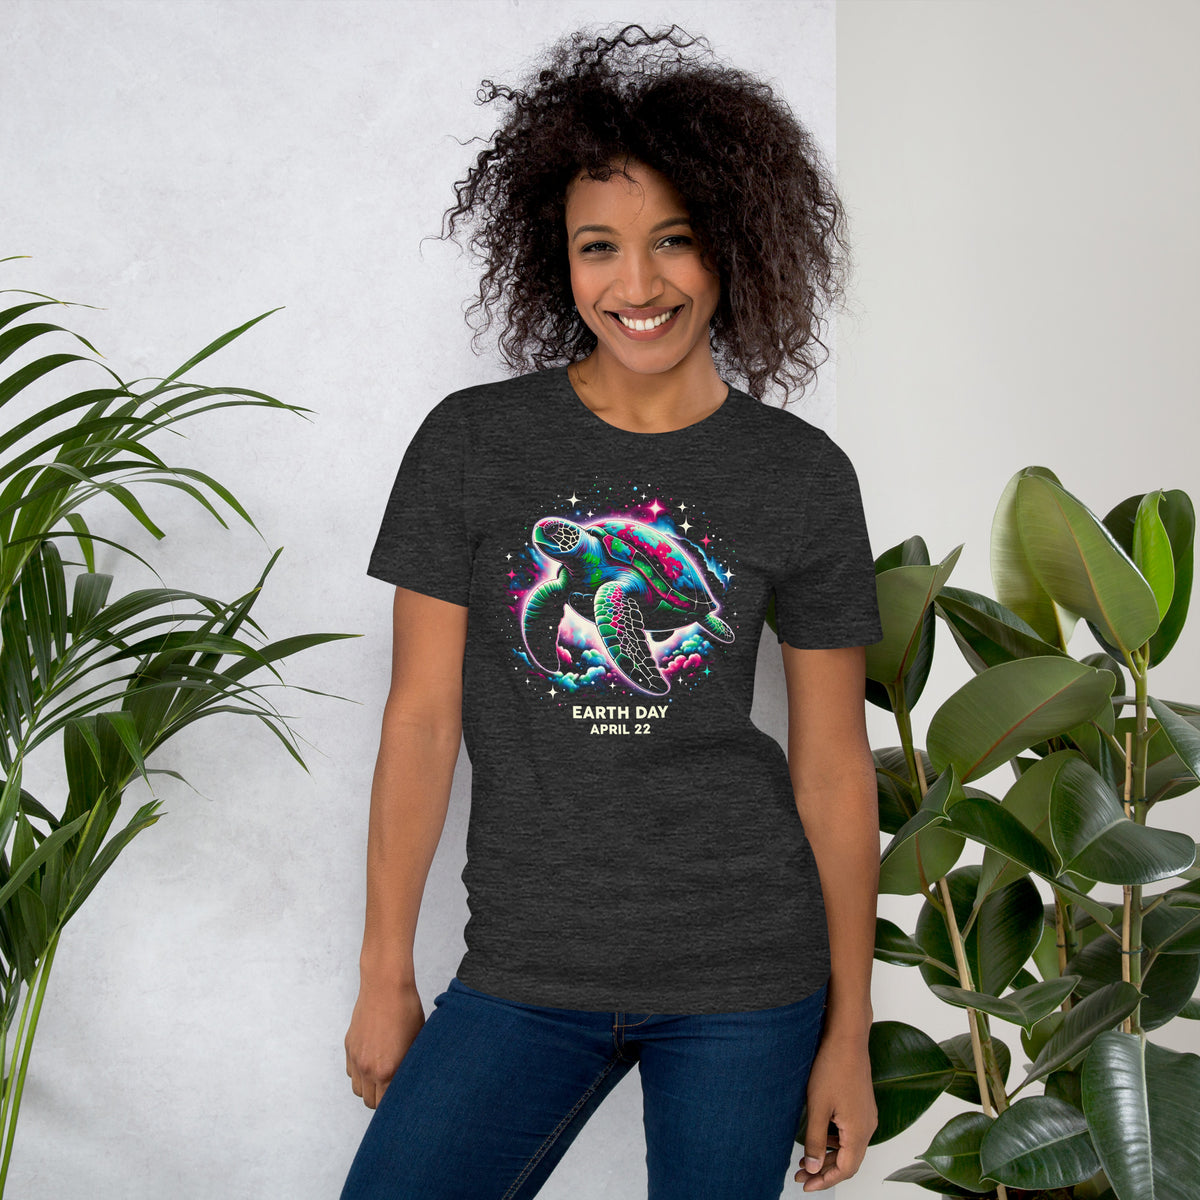 Earth Day Turtle Shirt, Outer Space Galaxy Sea Turtle Tee, Animal Activist Shirt, Environment Conservation Gift